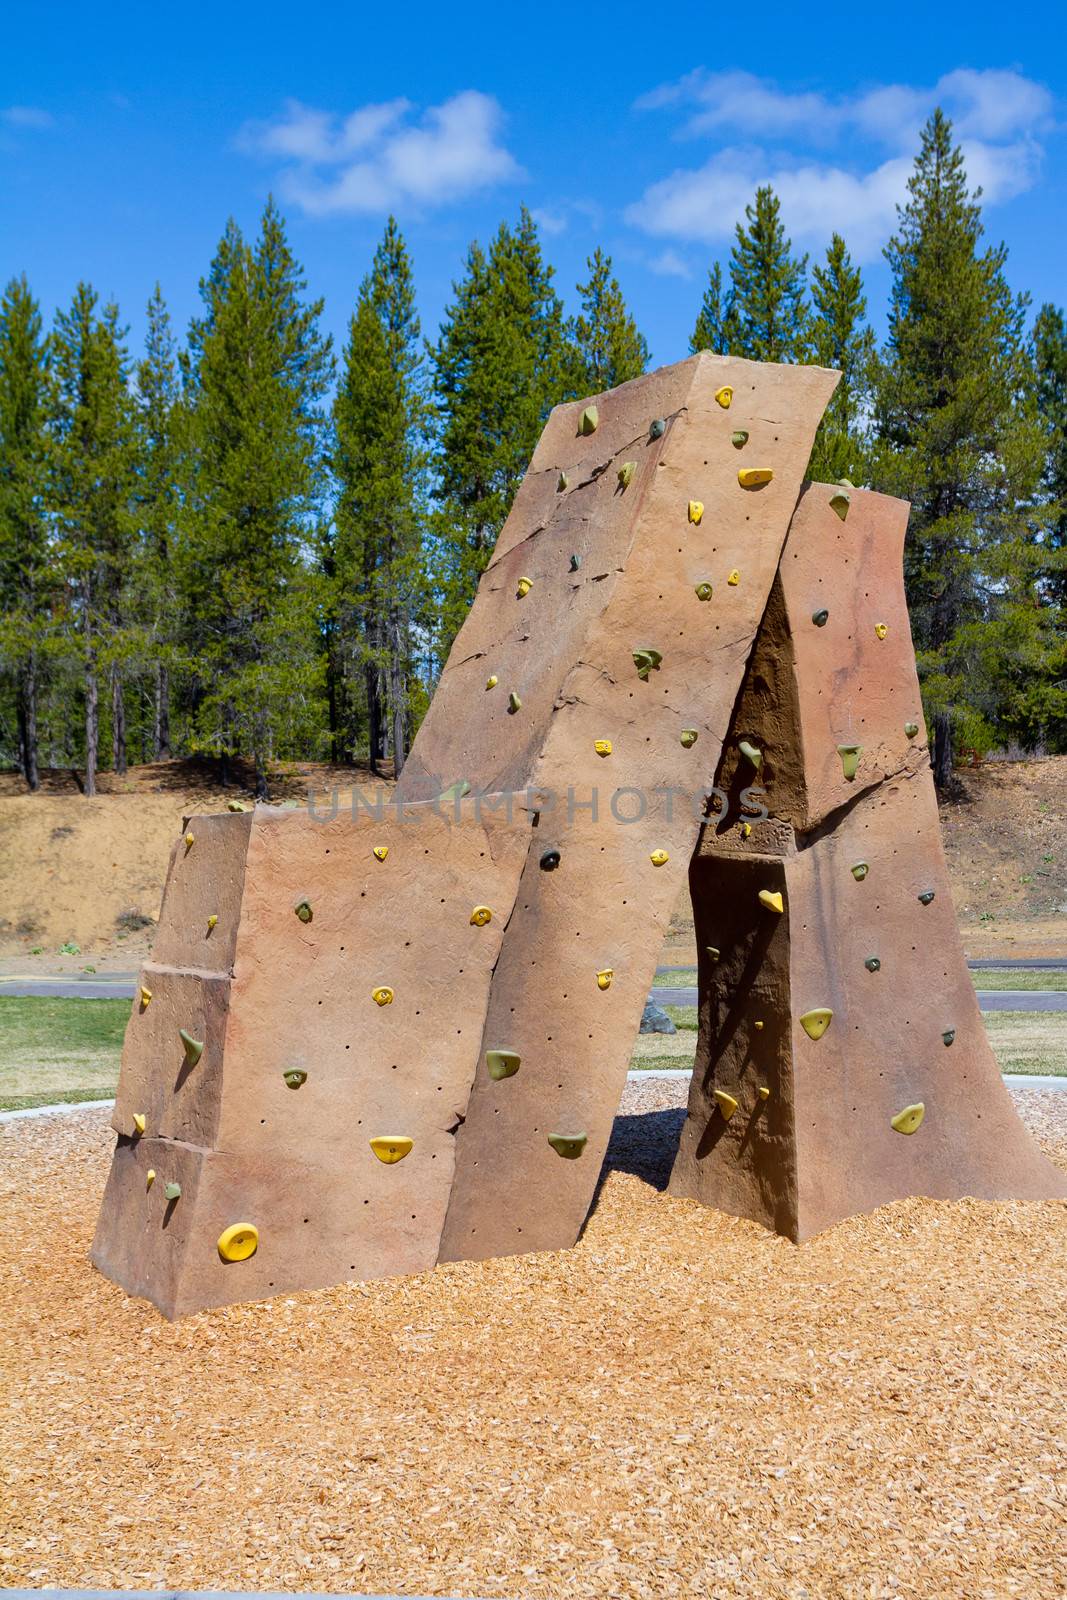 An outdoor rock climbing structure at a playground at a park for kids to practice and play on.